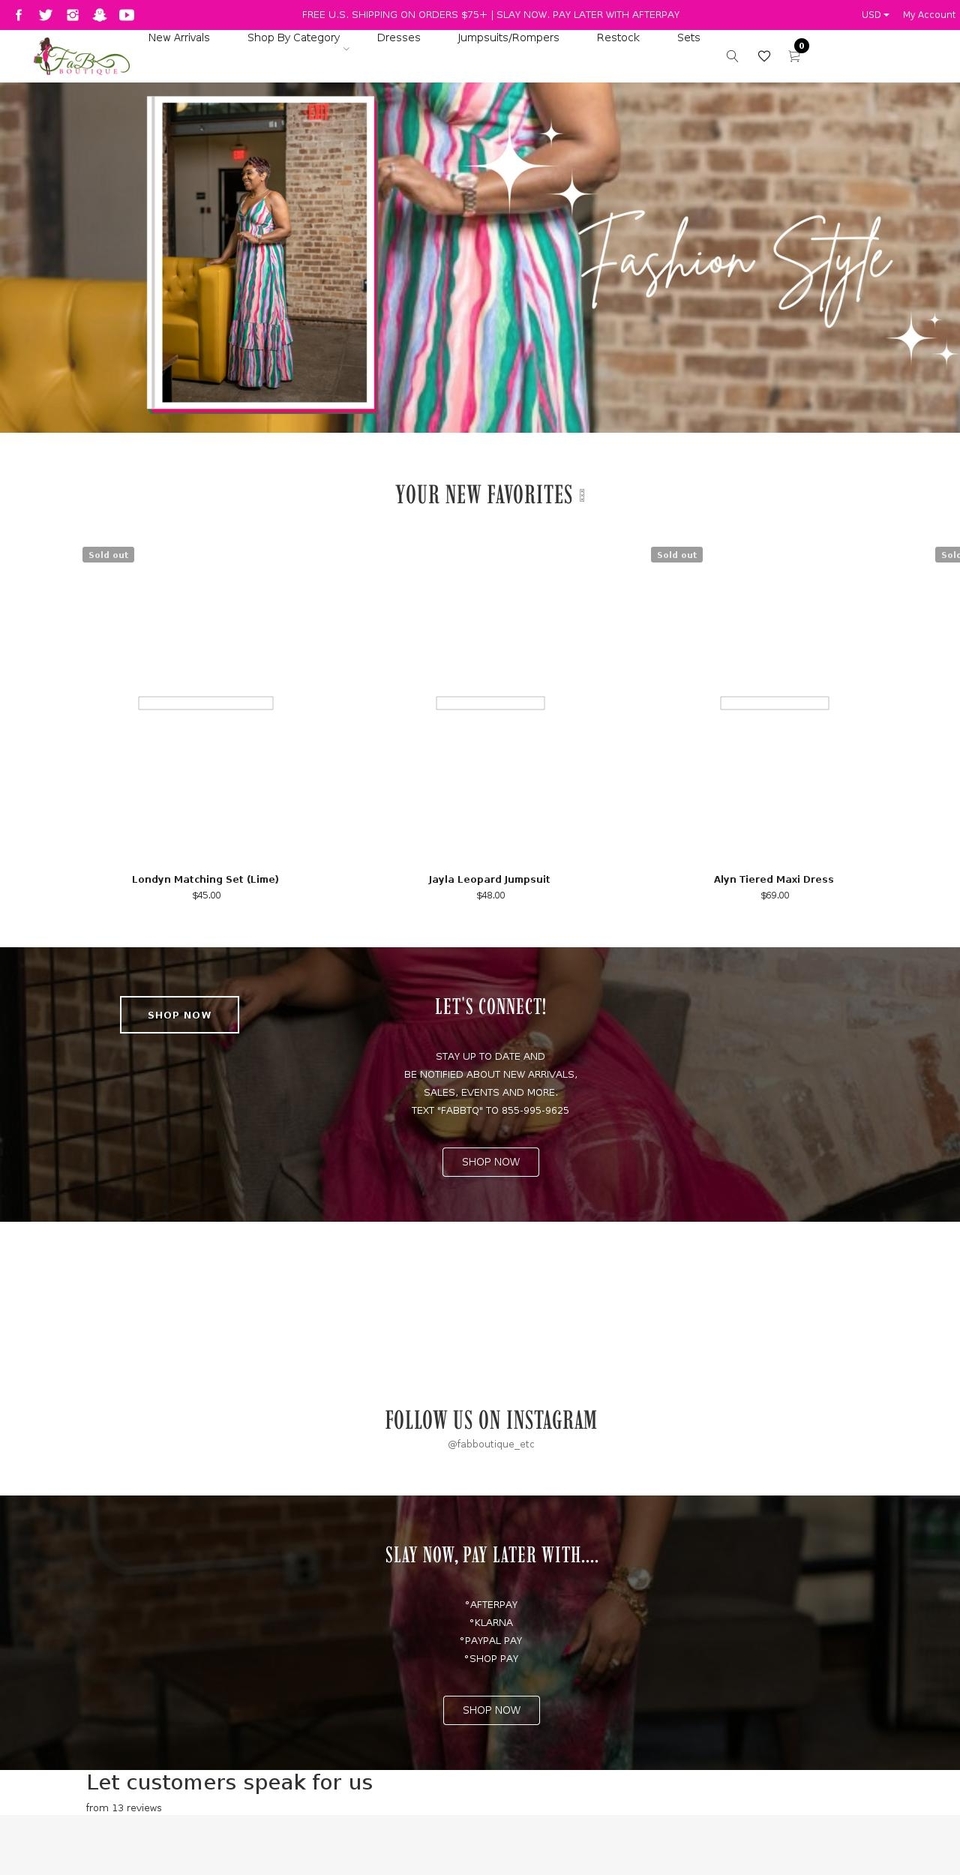 aries Shopify theme site example fabboutiqueetc.com